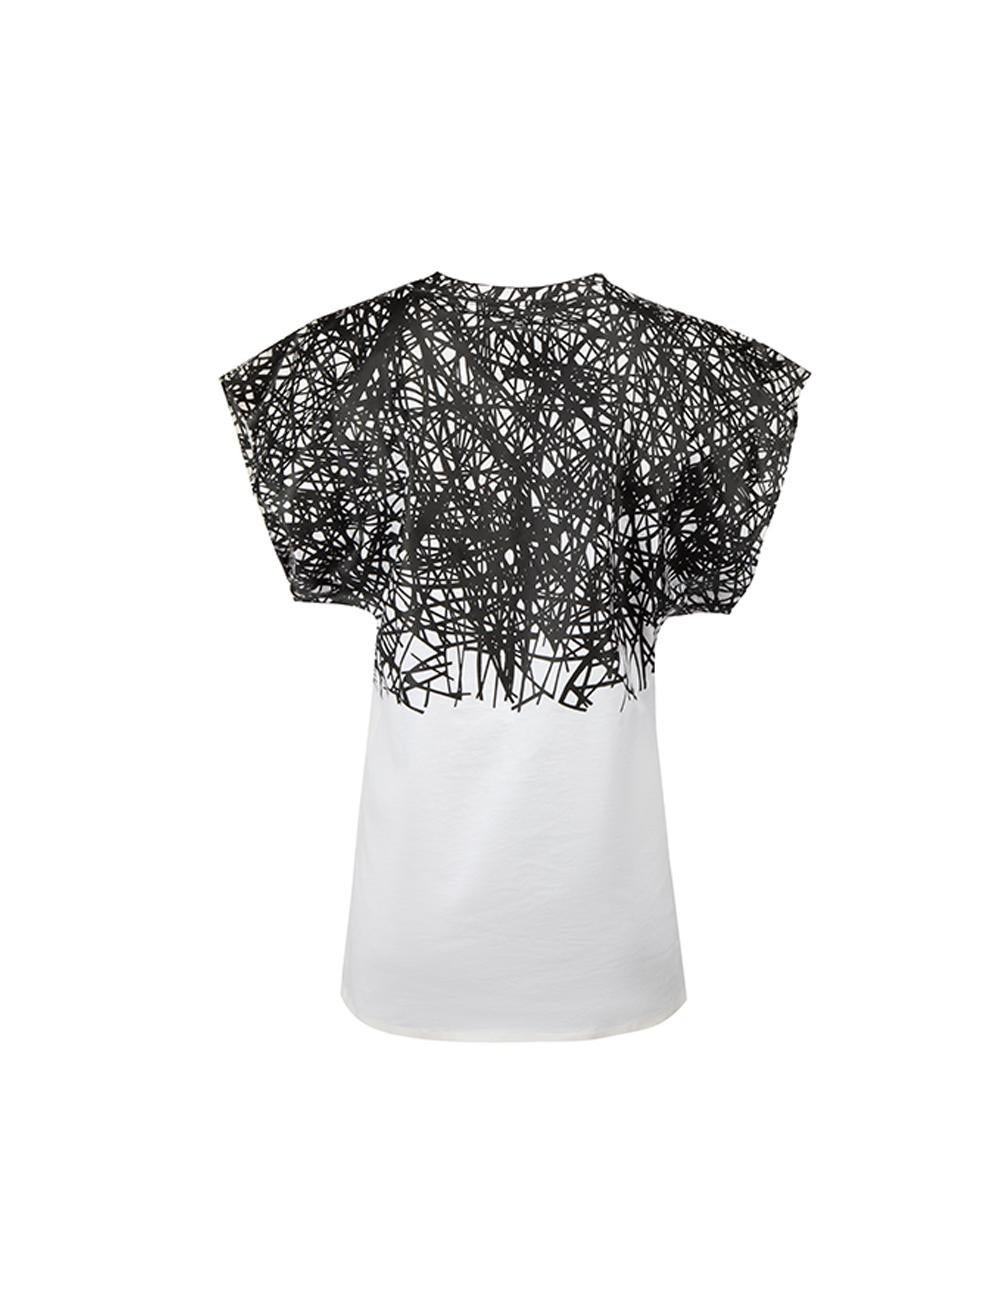 White Abstract Graffiti Print T-Shirt Size S In Good Condition For Sale In London, GB